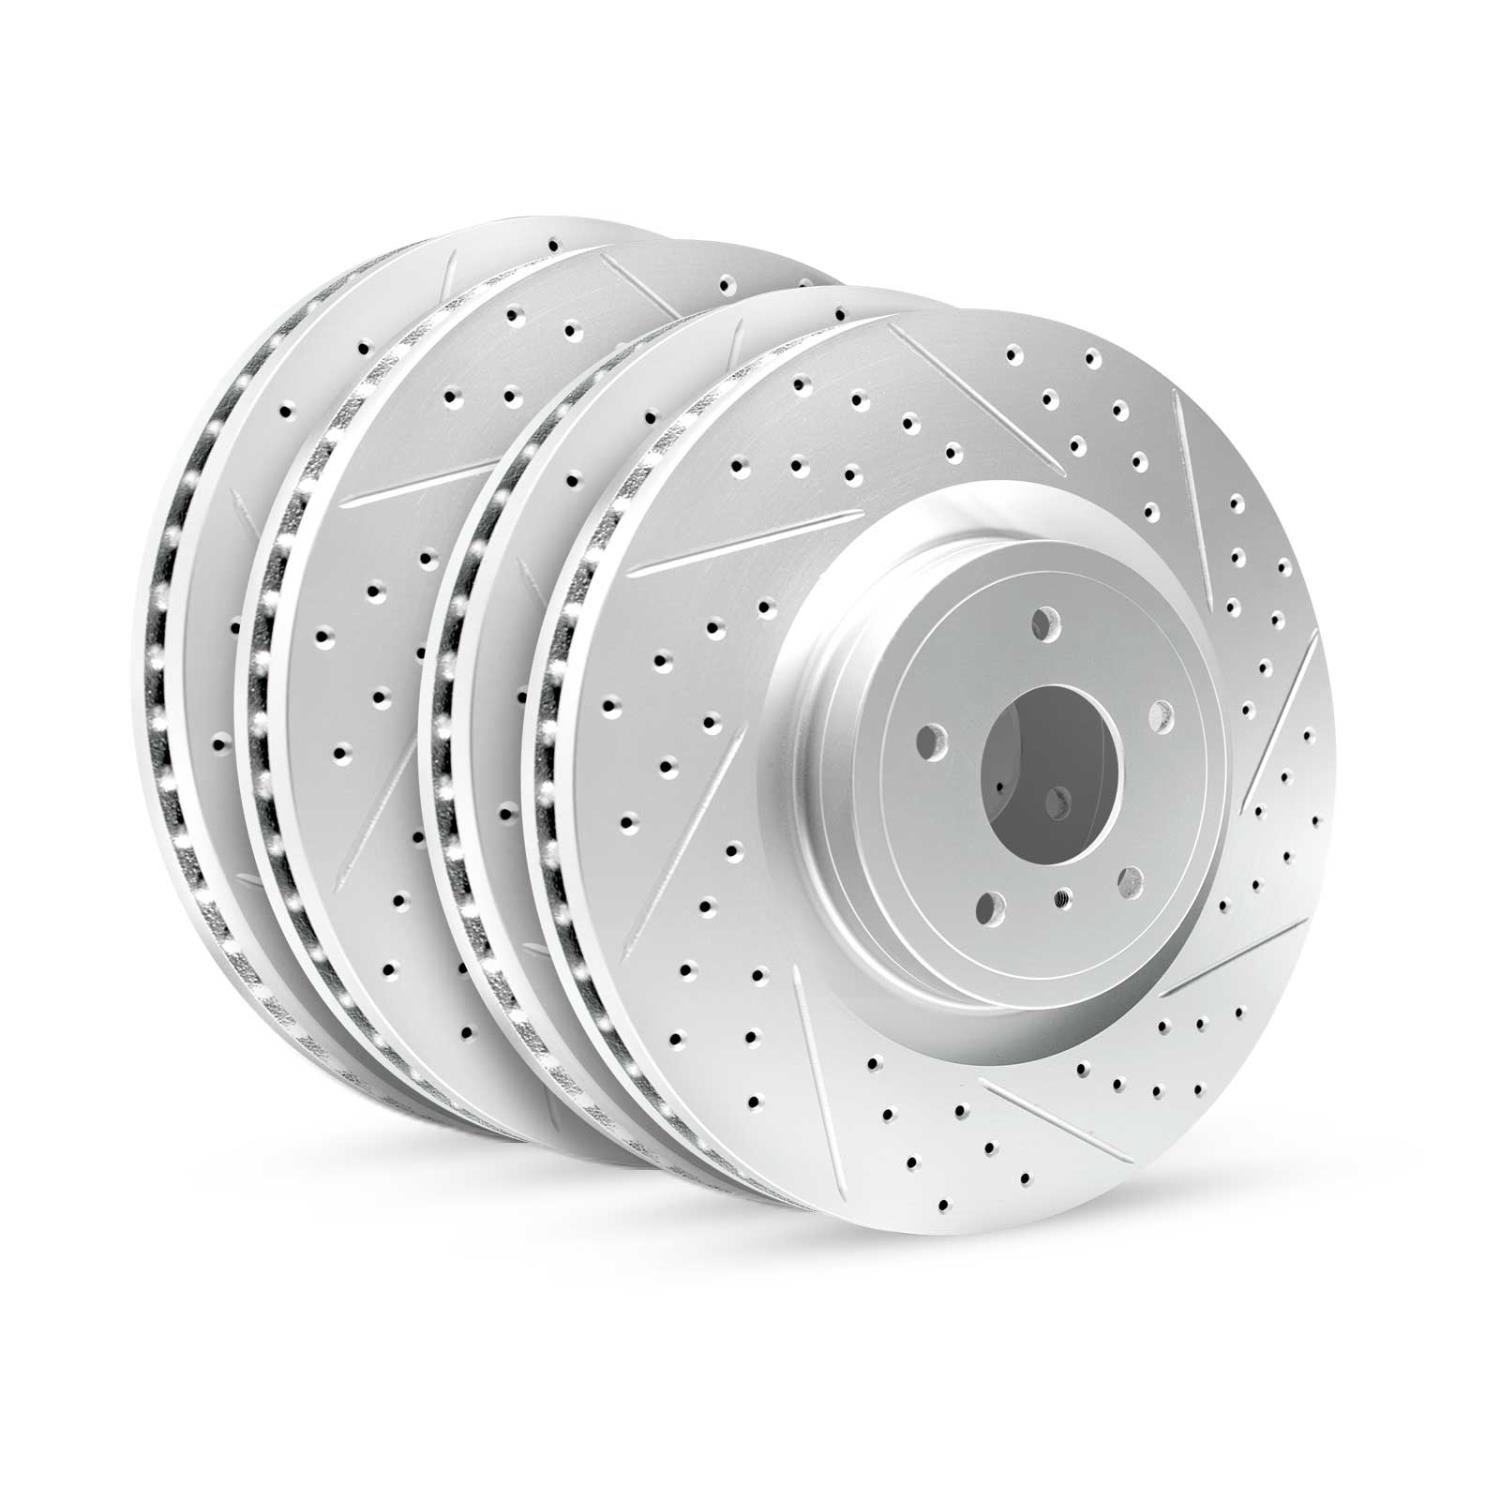 GEO-Carbon Drilled/Slotted Rotors, 1999-2004 Ford/Mazda,